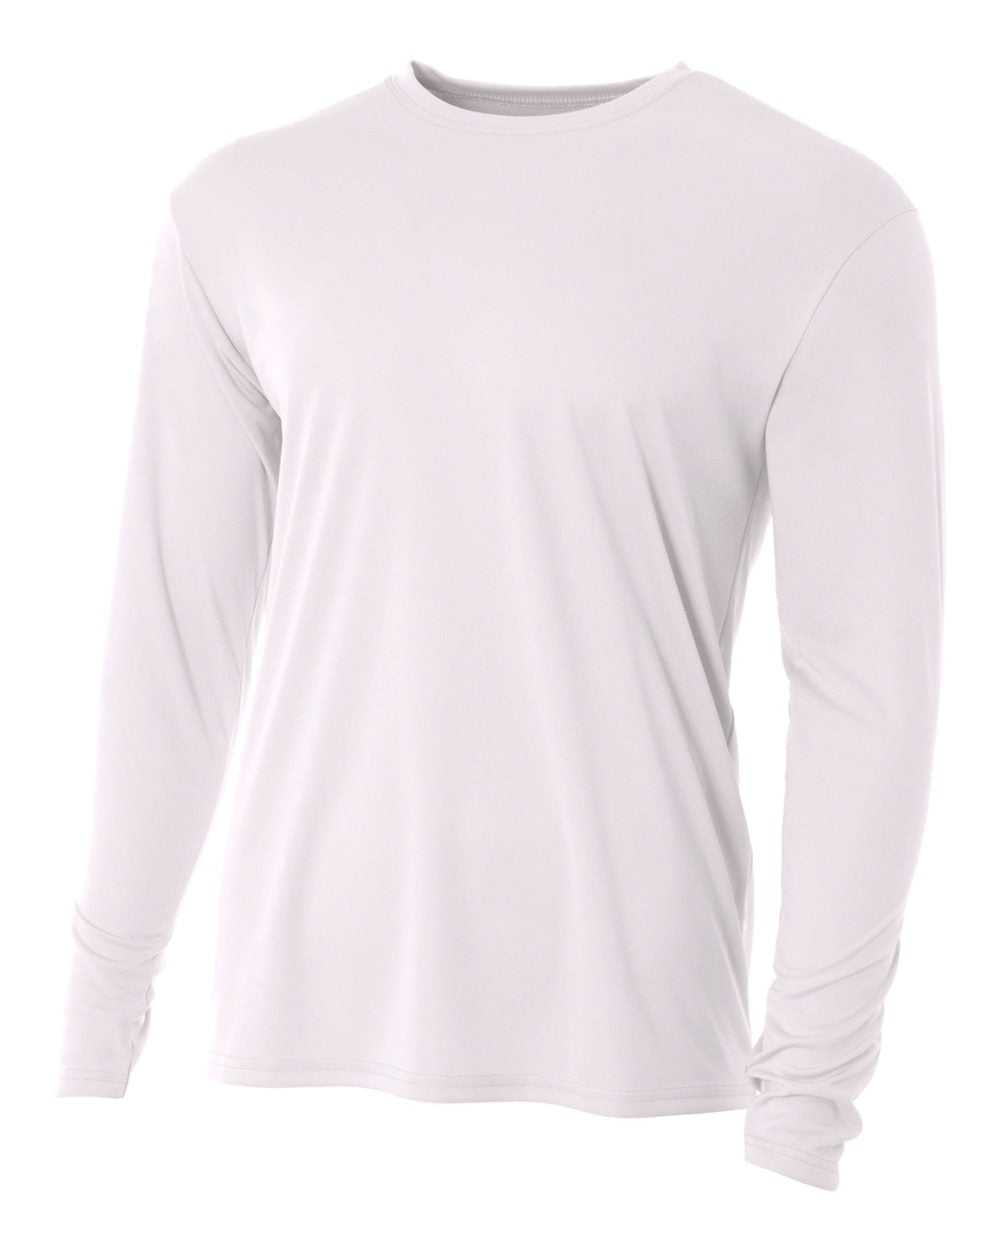 A4 N3165 Cooling Performance Long Sleeve Crew - White - HIT a Double